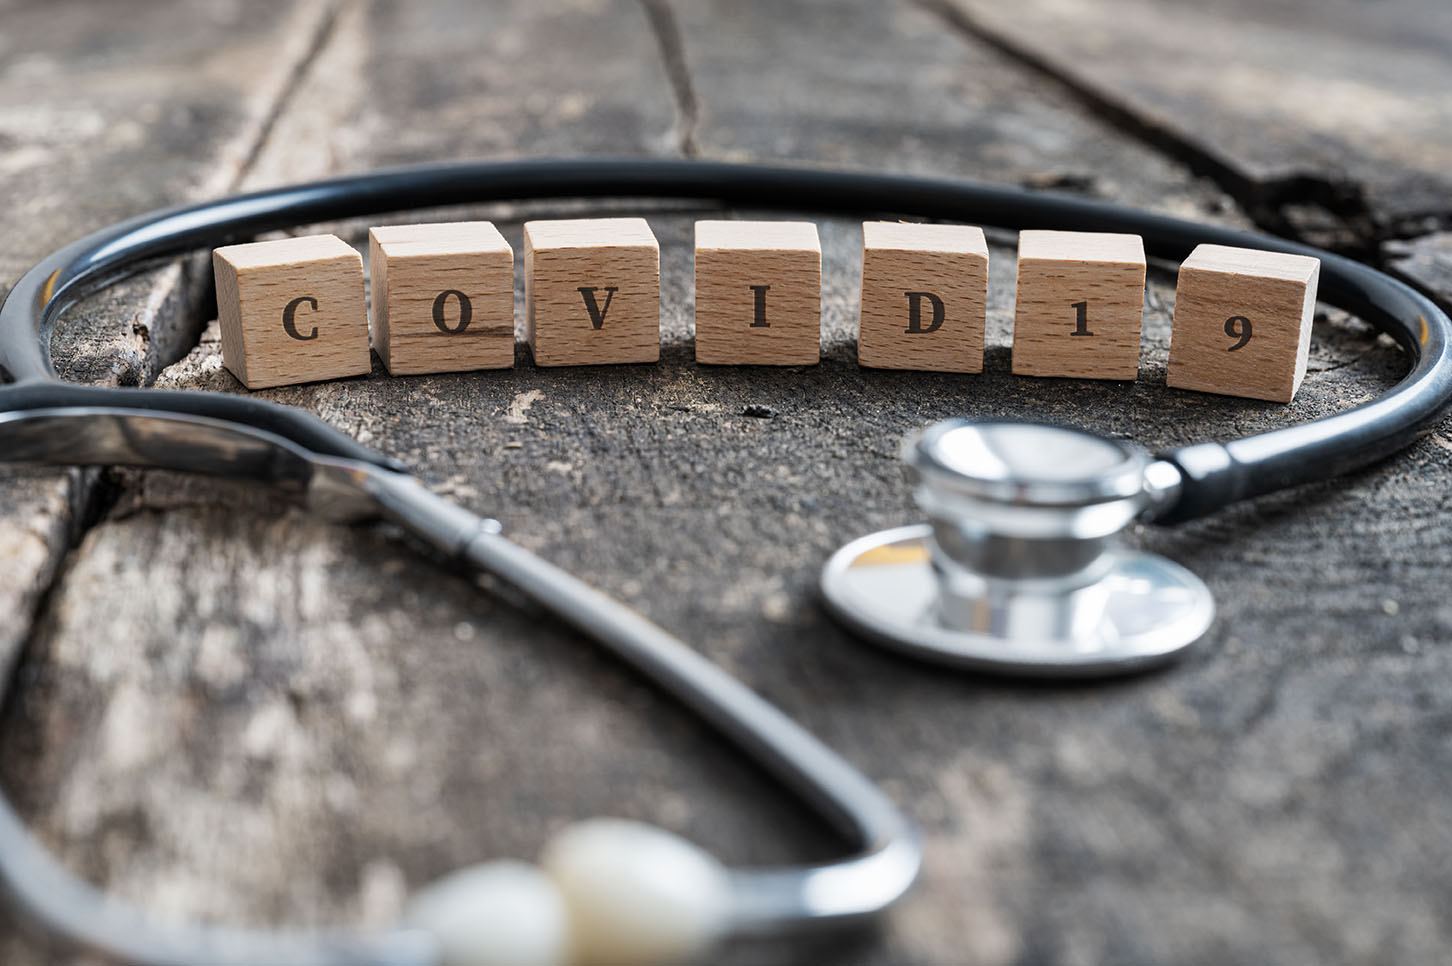 How Does COVID-19 Impact the Cannabis Industry?